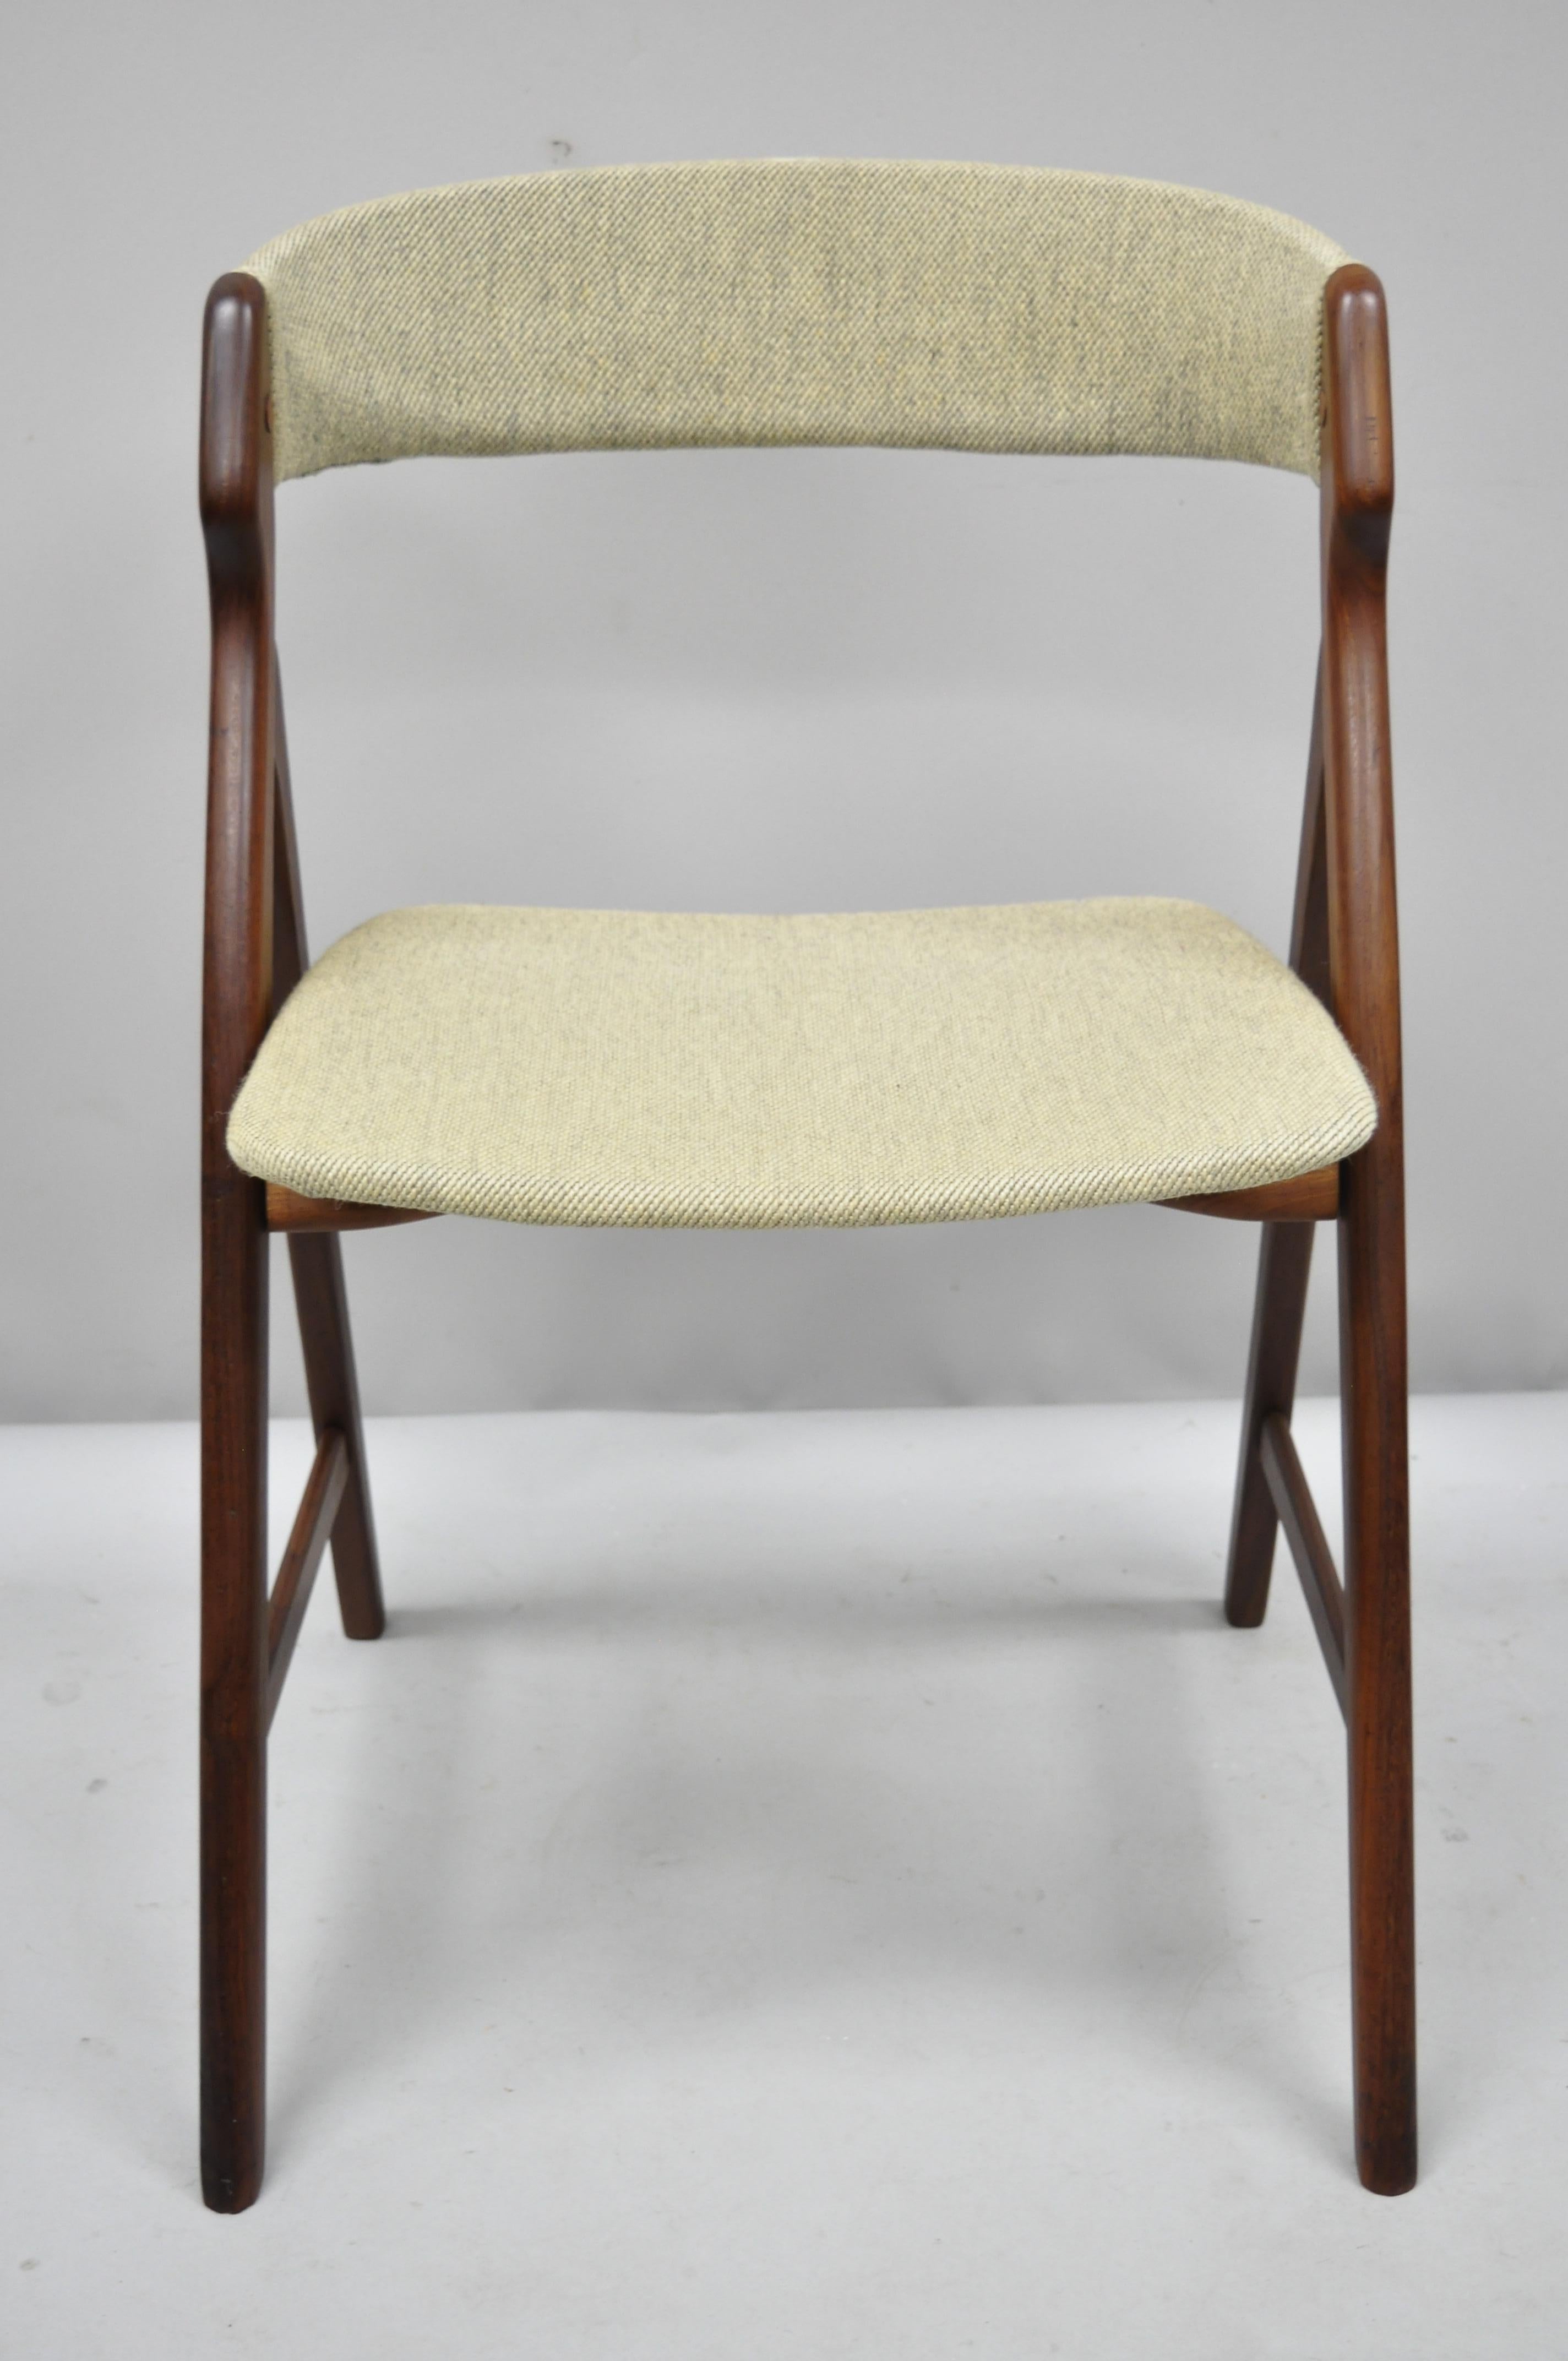 Midcentury Danish modern teak A-Frame dining chair by T.H. Harlev Farstrup. Curved back, A-frame design, solid teak wood construction, beautiful wood grain, tapered legs, clean modernist lines, designed by T.H. Harlev Farstrup, circa 1960.